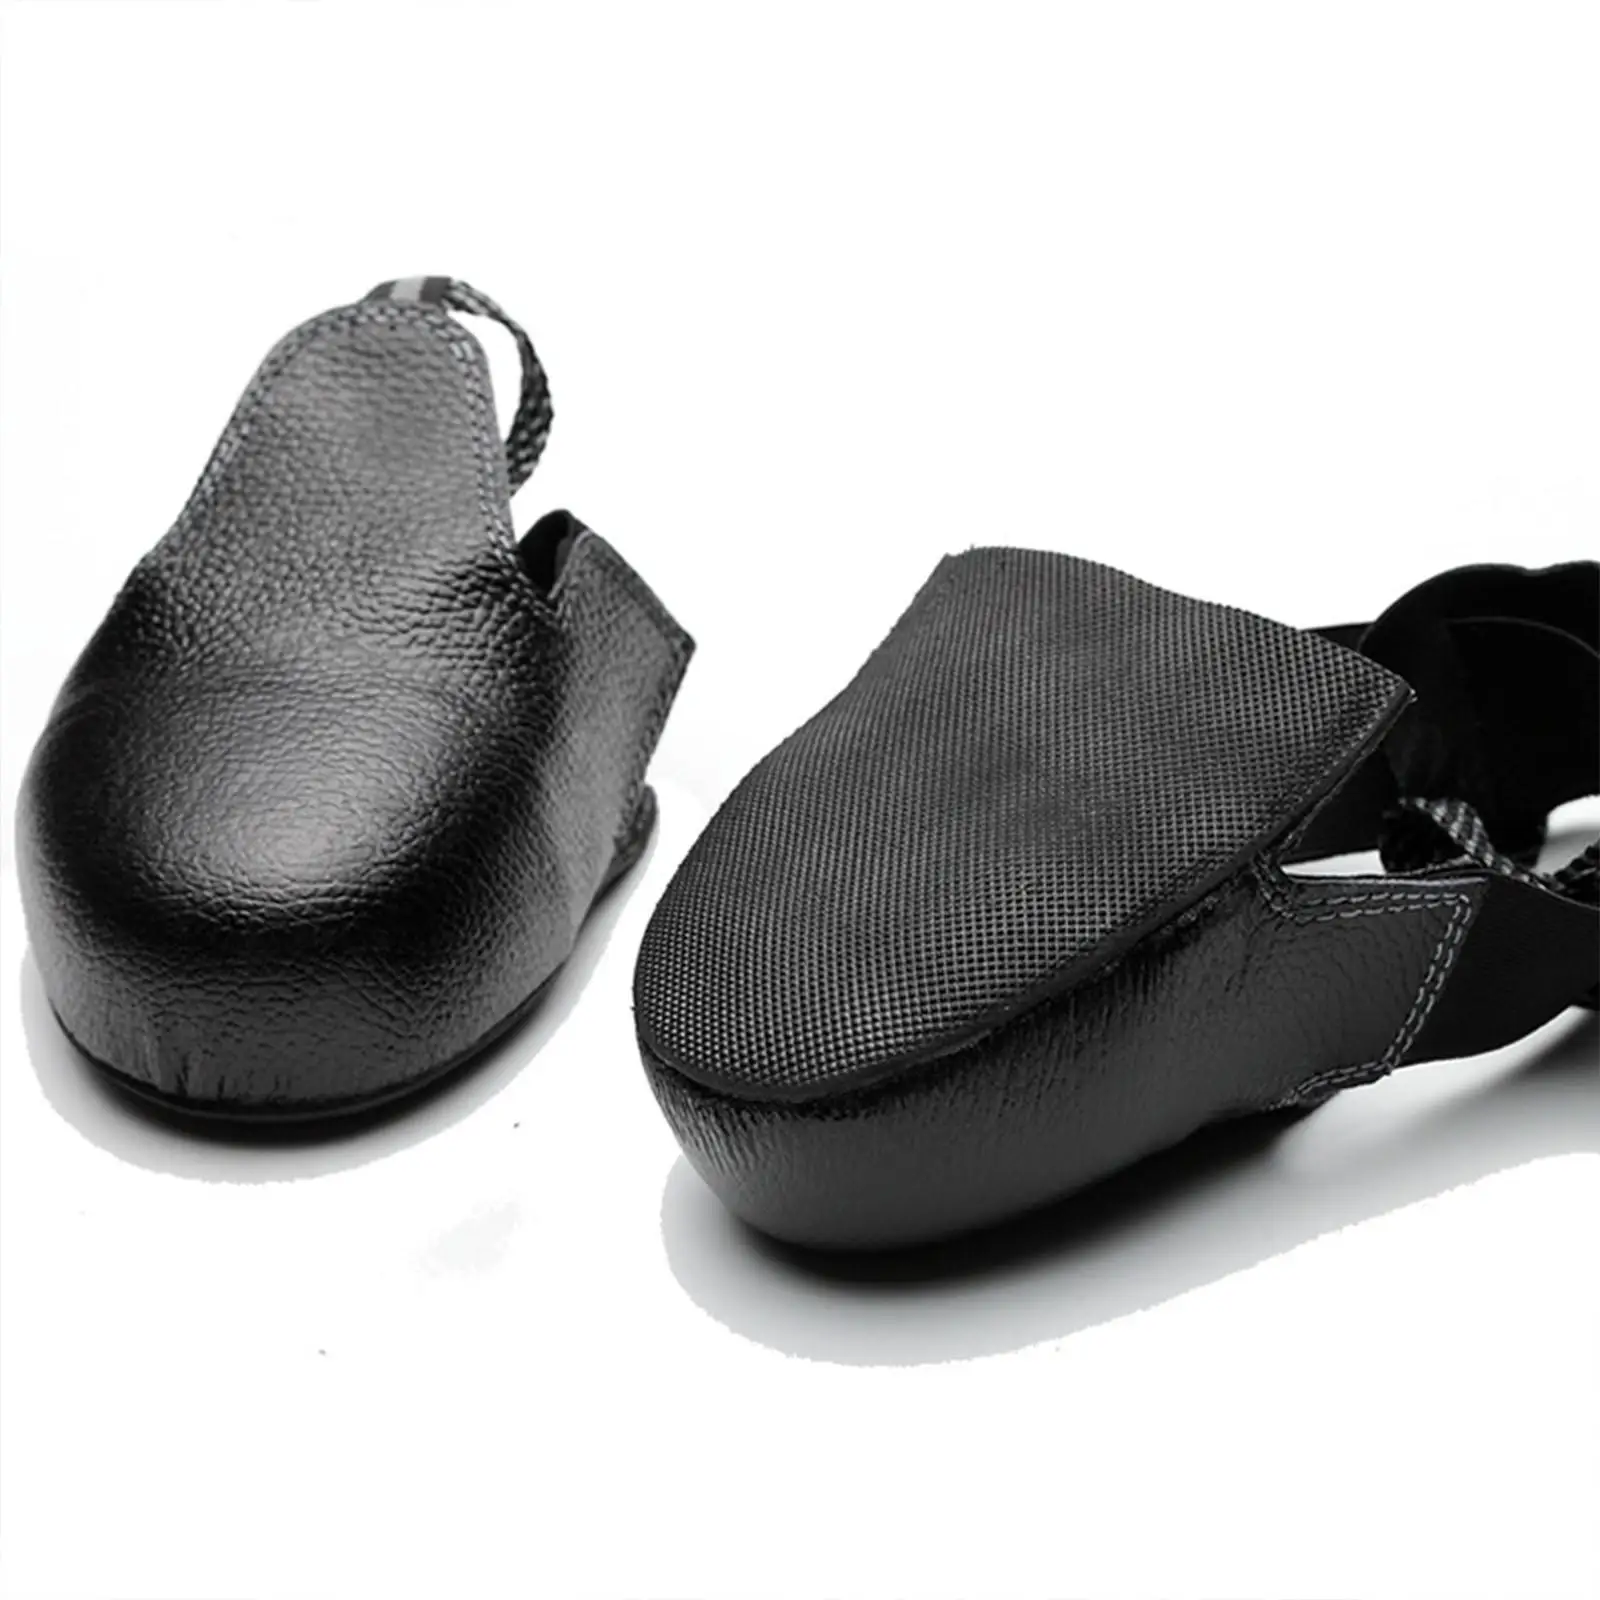 Leather Overshoes Covers Anti Smash Leather Shoes Cover Non Slip, Anti Smashing Guards, Toe Caps Safe Overshoes for Workplace